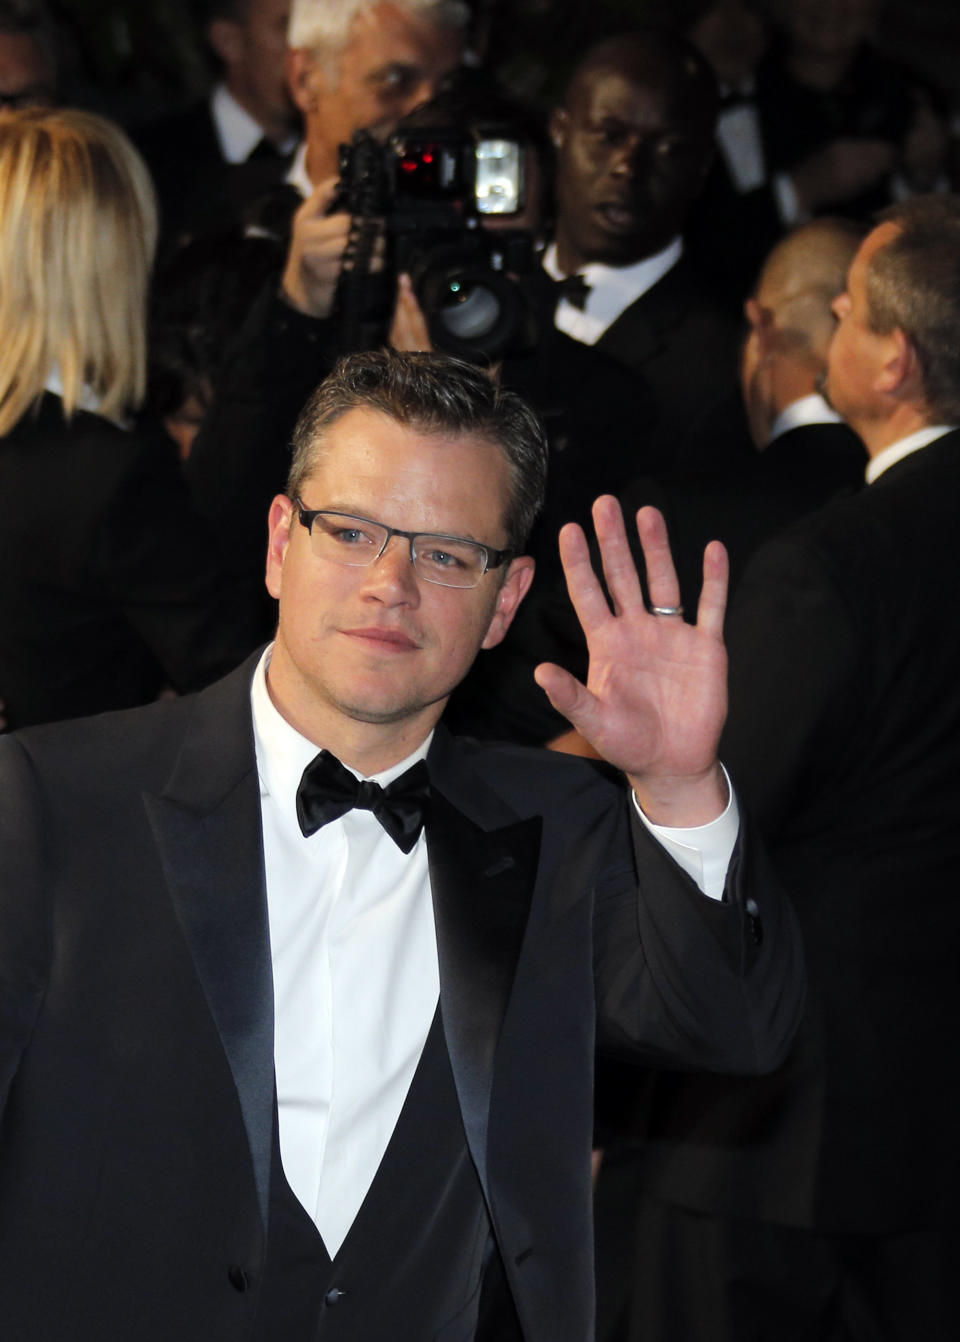 <a href="http://weedquotes.blogspot.com/2011/05/matt-damon-weed-quotes.html" target="_blank">“The first time I smoked was at home with my mother and step-father.”</a>